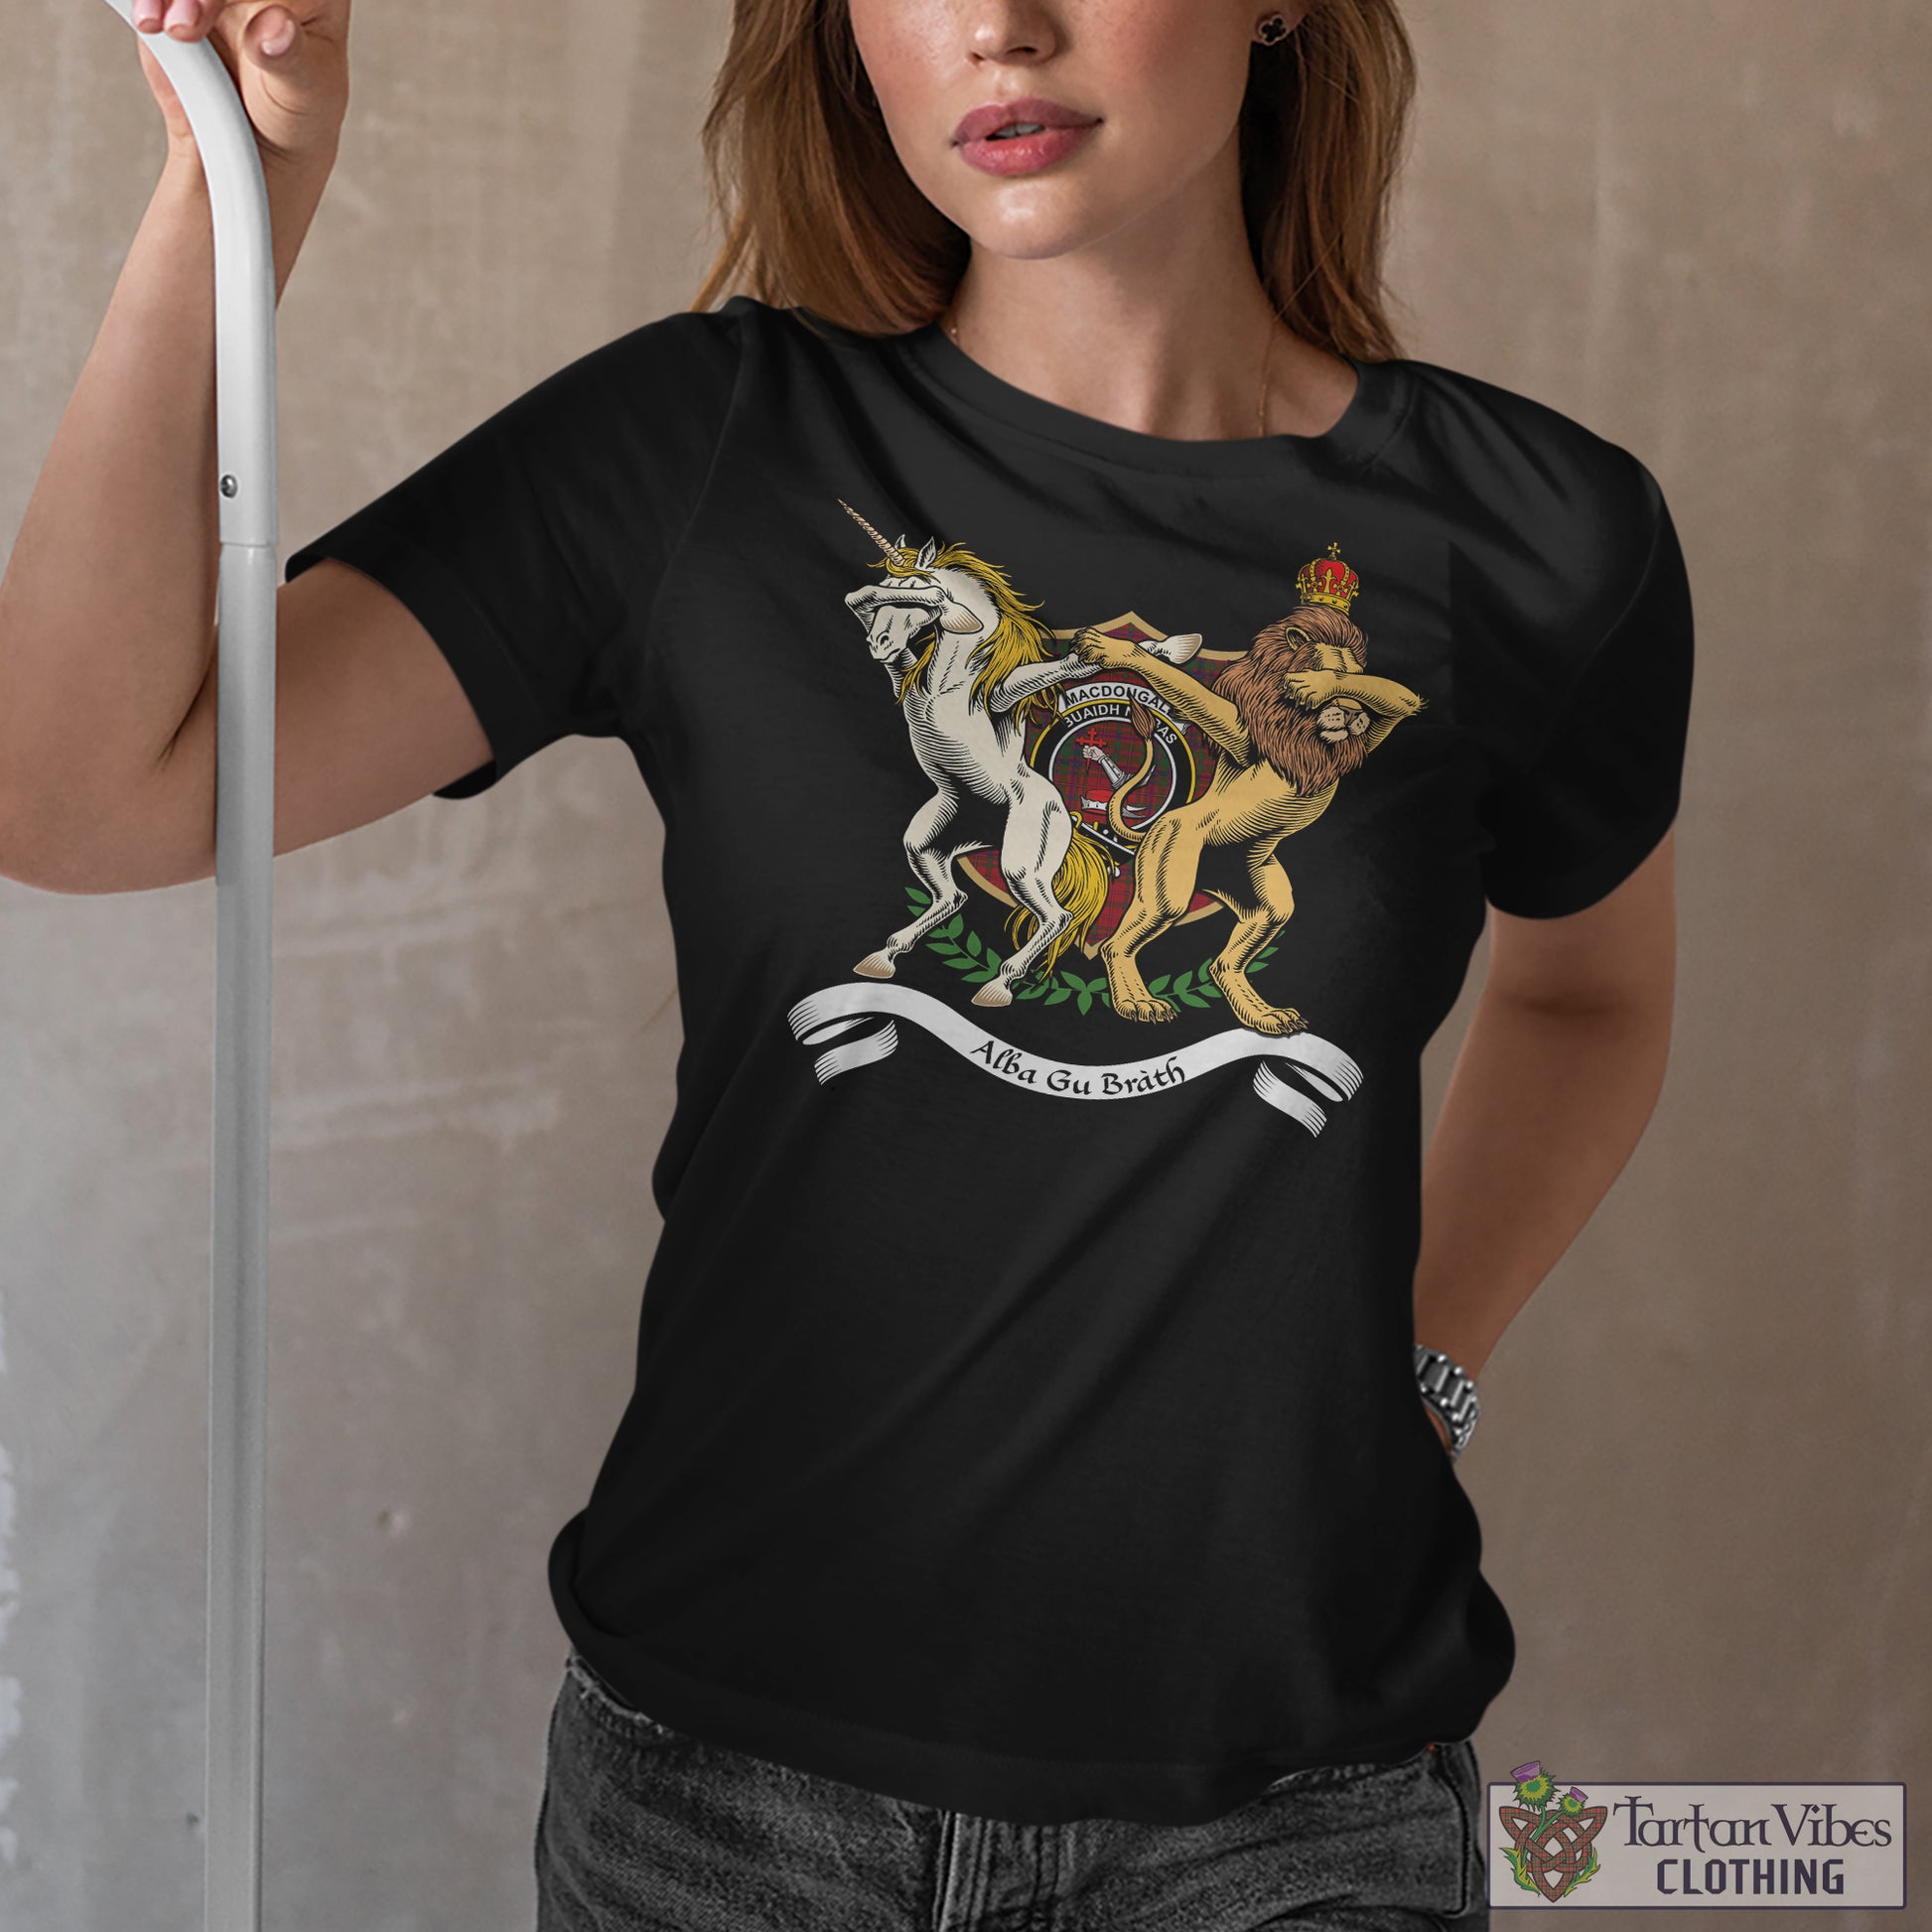 Tartan Vibes Clothing MacDougall Family Crest Cotton Women's T-Shirt with Scotland Royal Coat Of Arm Funny Style